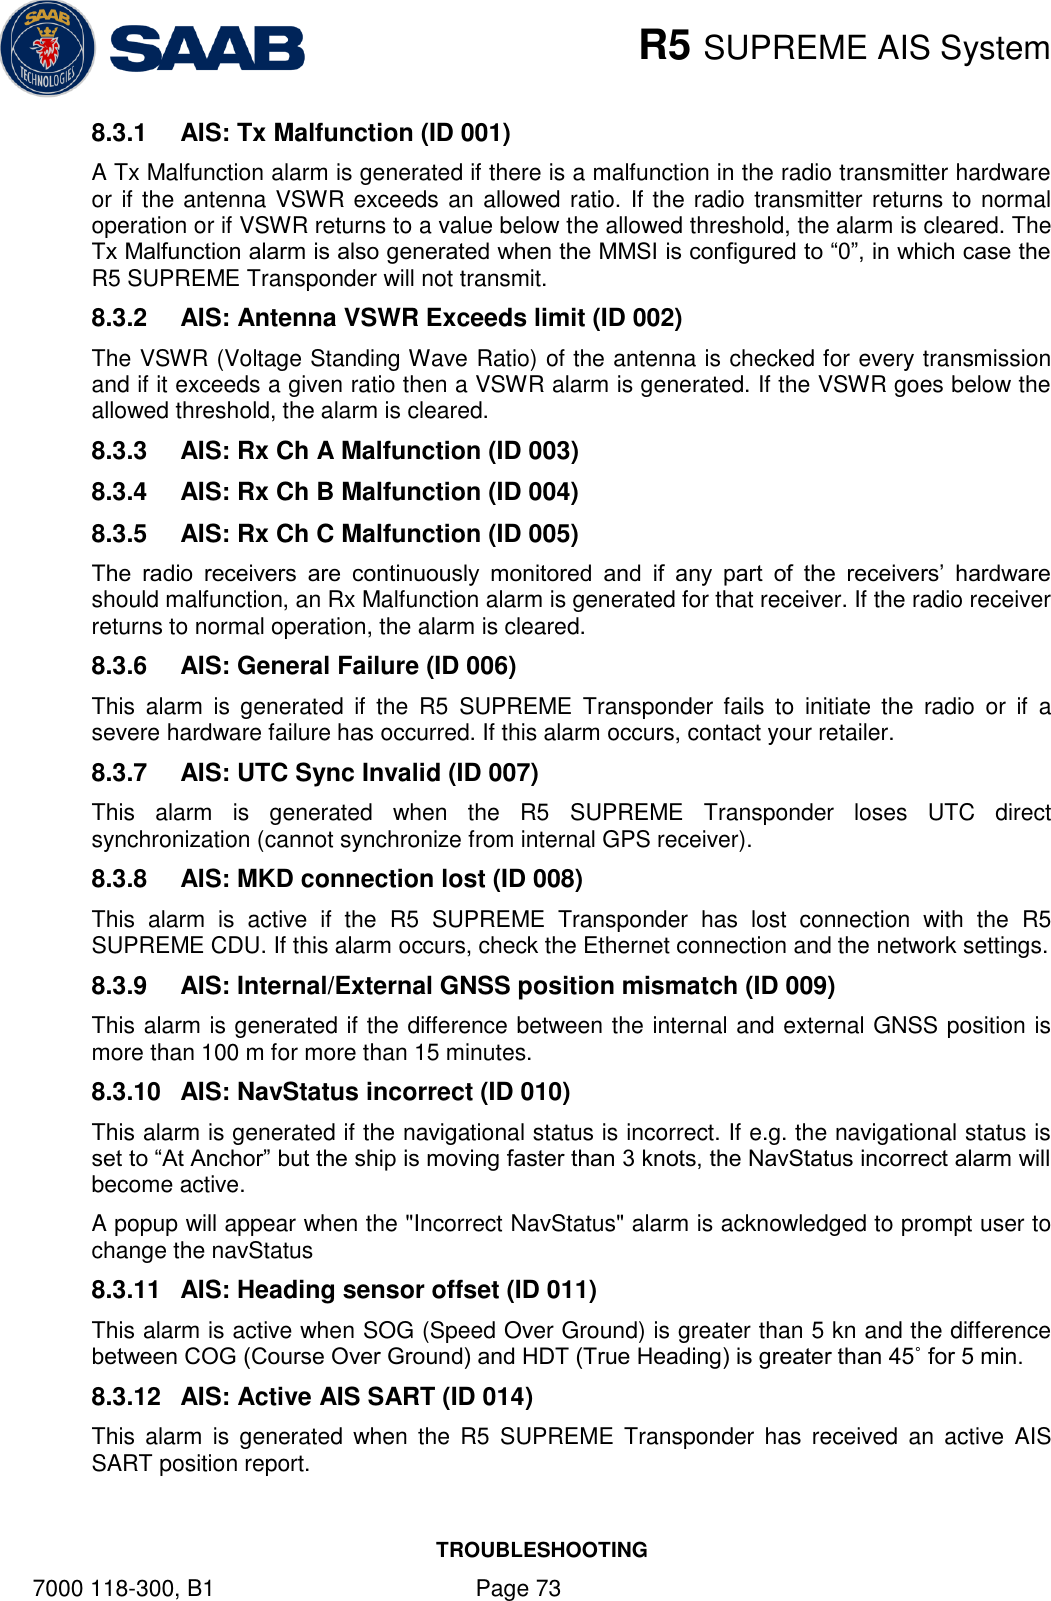    R5 SUPREME AIS System TROUBLESHOOTING 7000 118-300, B1    Page 73 8.3.1  AIS: Tx Malfunction (ID 001) A Tx Malfunction alarm is generated if there is a malfunction in the radio transmitter hardware or if the antenna VSWR exceeds an allowed ratio. If the radio transmitter returns to normal operation or if VSWR returns to a value below the allowed threshold, the alarm is cleared. The Tx Malfunction alarm is also generated when the MMSI is configured to “0”, in which case the R5 SUPREME Transponder will not transmit. 8.3.2  AIS: Antenna VSWR Exceeds limit (ID 002) The VSWR (Voltage Standing Wave Ratio) of the antenna is checked for every transmission and if it exceeds a given ratio then a VSWR alarm is generated. If the VSWR goes below the allowed threshold, the alarm is cleared. 8.3.3  AIS: Rx Ch A Malfunction (ID 003) 8.3.4  AIS: Rx Ch B Malfunction (ID 004) 8.3.5  AIS: Rx Ch C Malfunction (ID 005) The  radio  receivers  are  continuously  monitored  and  if  any  part  of  the  receivers’  hardware should malfunction, an Rx Malfunction alarm is generated for that receiver. If the radio receiver returns to normal operation, the alarm is cleared. 8.3.6  AIS: General Failure (ID 006) This  alarm  is  generated  if  the  R5  SUPREME  Transponder  fails  to  initiate  the  radio  or  if  a severe hardware failure has occurred. If this alarm occurs, contact your retailer. 8.3.7  AIS: UTC Sync Invalid (ID 007) This  alarm  is  generated  when  the  R5  SUPREME  Transponder  loses  UTC  direct synchronization (cannot synchronize from internal GPS receiver). 8.3.8  AIS: MKD connection lost (ID 008) This  alarm  is  active  if  the  R5  SUPREME  Transponder  has  lost  connection  with  the  R5 SUPREME CDU. If this alarm occurs, check the Ethernet connection and the network settings. 8.3.9  AIS: Internal/External GNSS position mismatch (ID 009) This alarm is generated if the difference between the internal and external GNSS position is more than 100 m for more than 15 minutes. 8.3.10  AIS: NavStatus incorrect (ID 010) This alarm is generated if the navigational status is incorrect. If e.g. the navigational status is set to “At Anchor” but the ship is moving faster than 3 knots, the NavStatus incorrect alarm will become active. A popup will appear when the &quot;Incorrect NavStatus&quot; alarm is acknowledged to prompt user to change the navStatus 8.3.11  AIS: Heading sensor offset (ID 011) This alarm is active when SOG (Speed Over Ground) is greater than 5 kn and the difference between COG (Course Over Ground) and HDT (True Heading) is greater than 45˚ for 5 min. 8.3.12  AIS: Active AIS SART (ID 014) This  alarm  is generated  when the  R5  SUPREME  Transponder  has  received  an  active  AIS SART position report. 